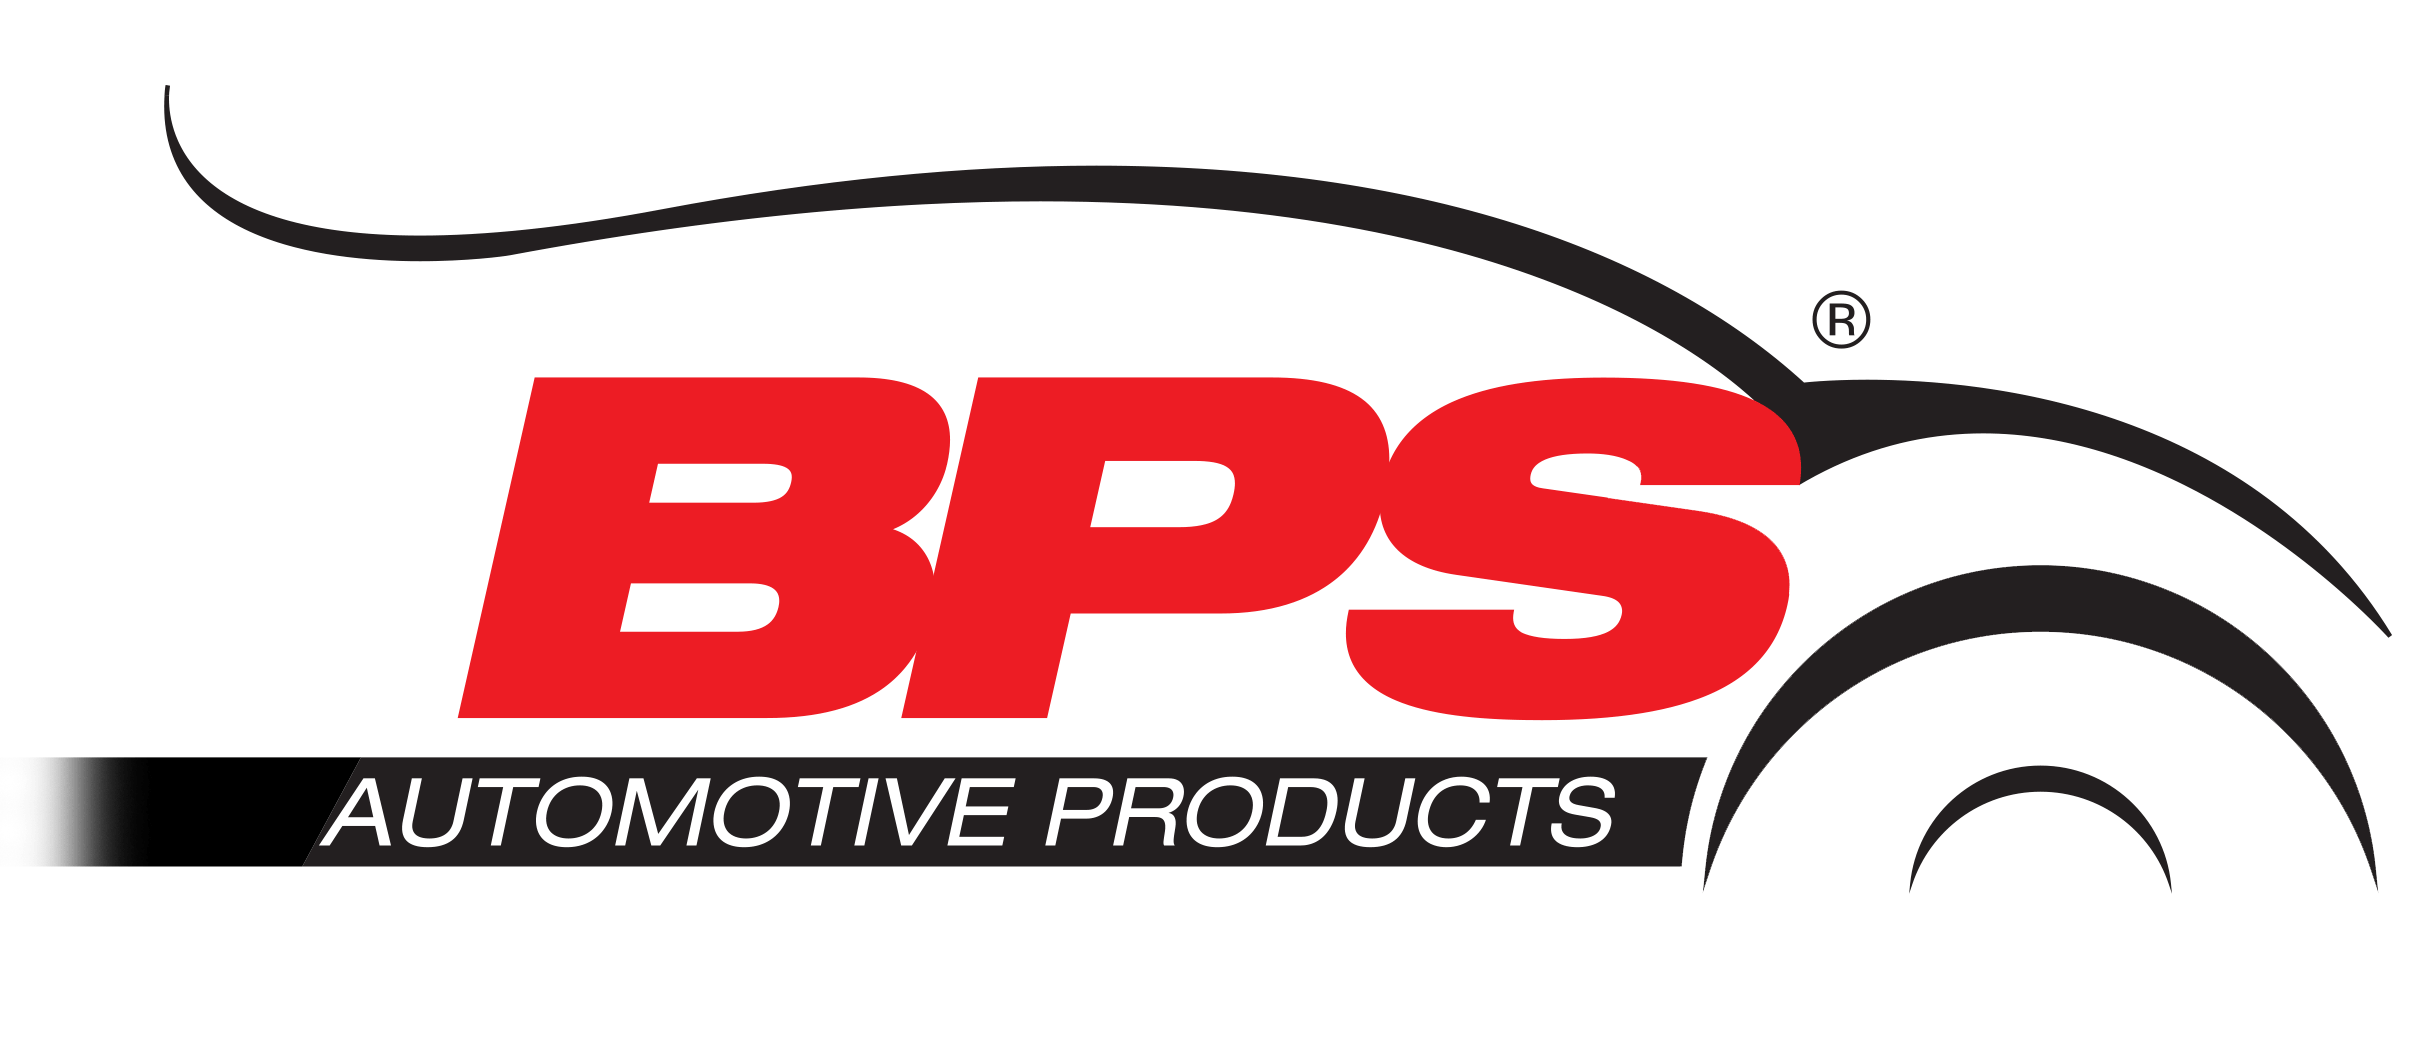 Automotive Products Logo - BPS Automotive Products. High Quality Water Pumps And Parts